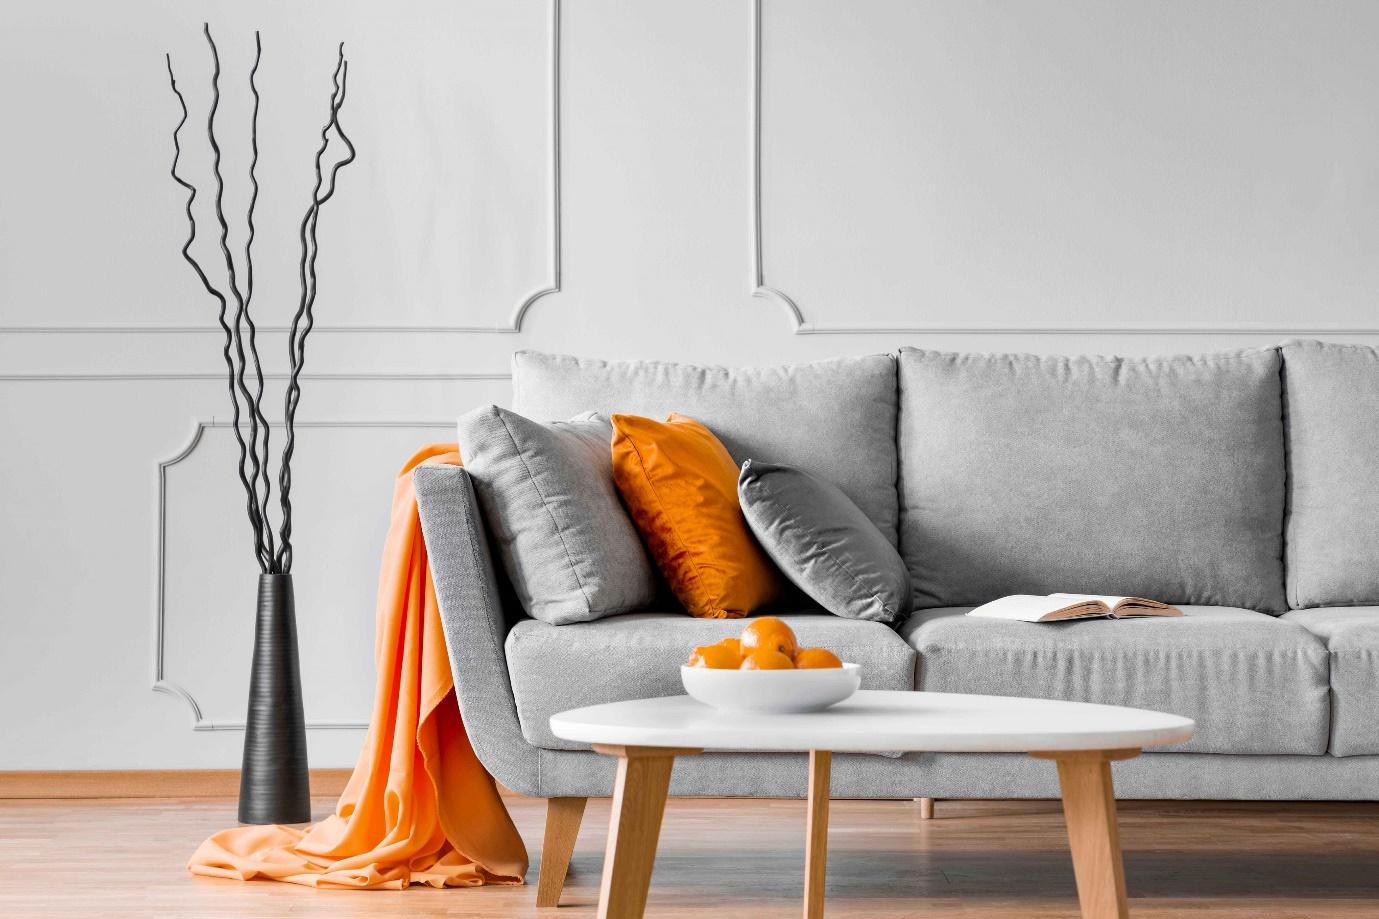 dress your home for autumn